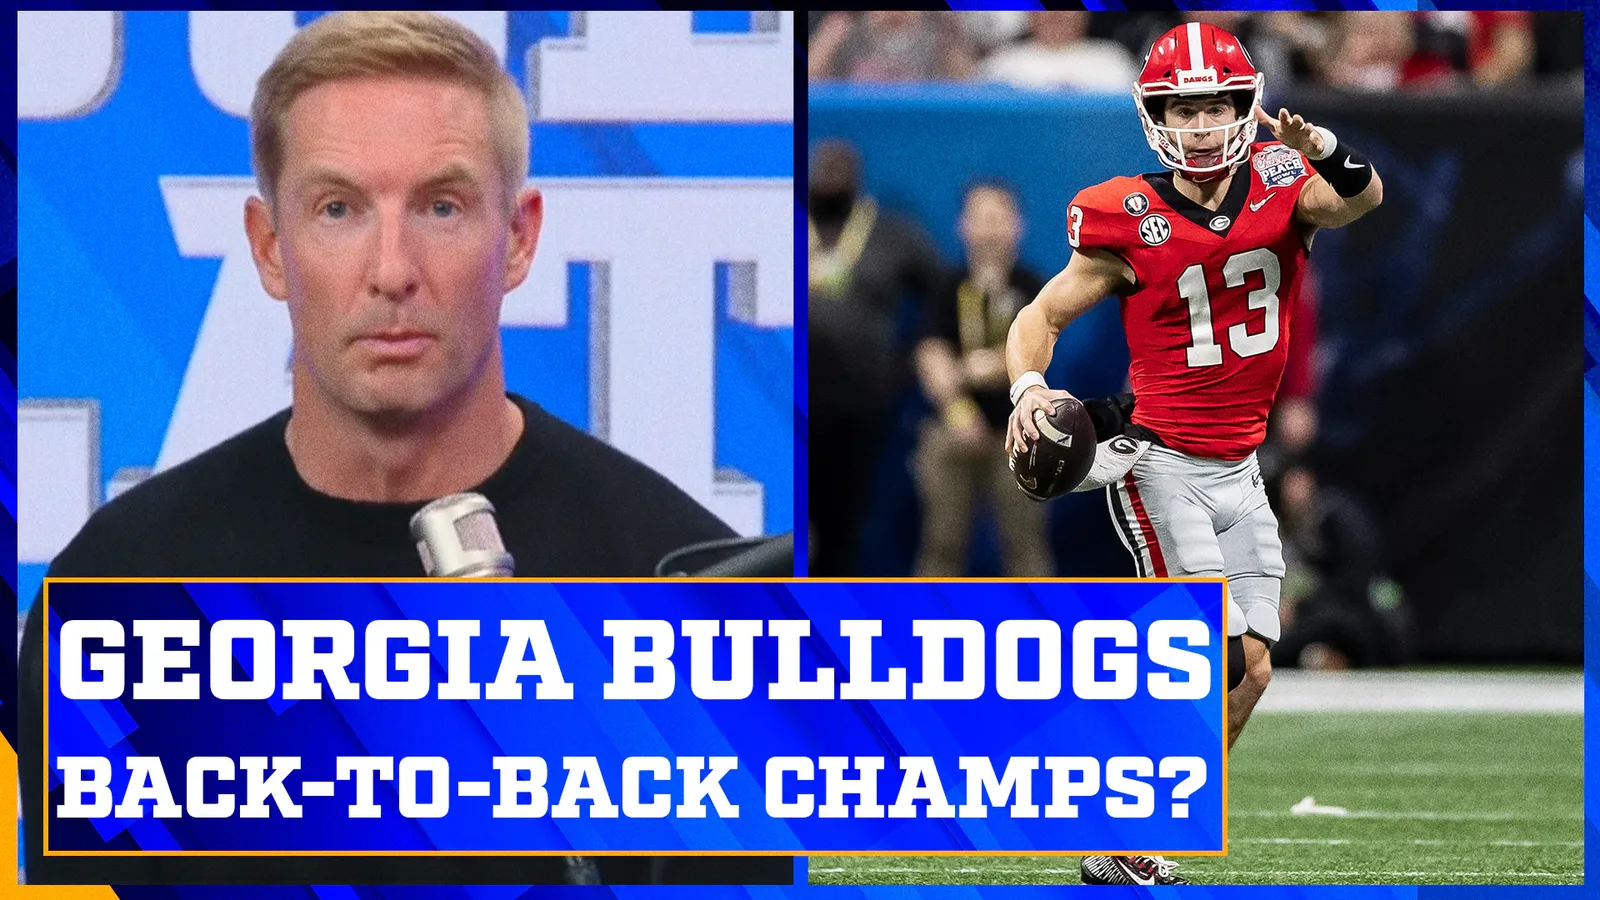 Can Georgia be back-to-back champions?